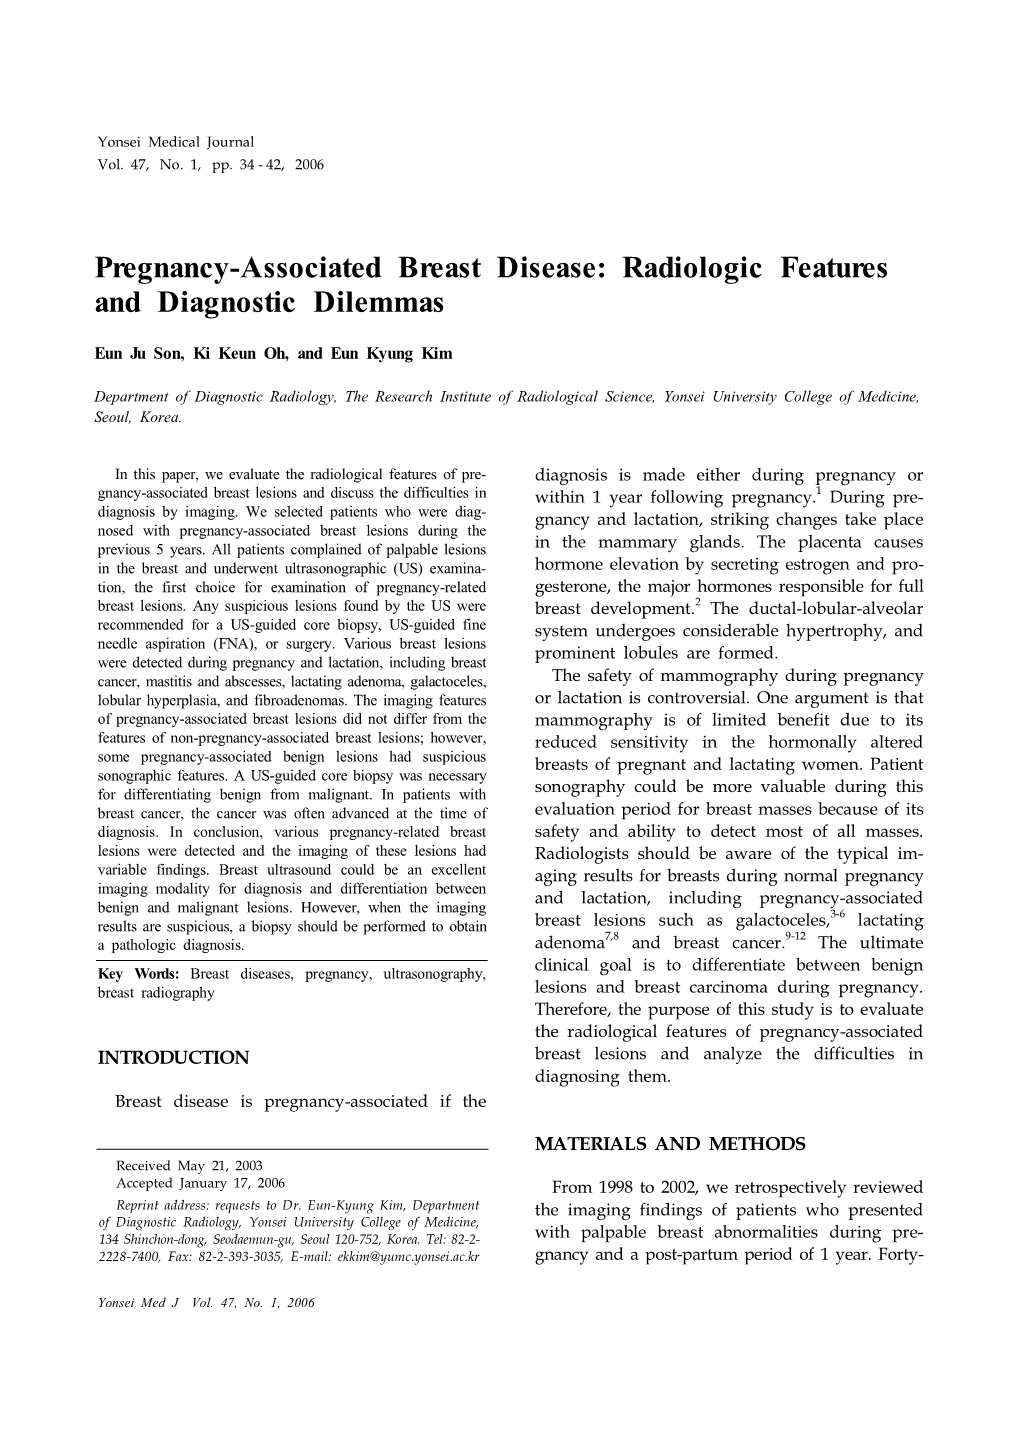 Pregnancy-Associated Breast Disease: Radiologic Features and Diagnostic Dilemmas